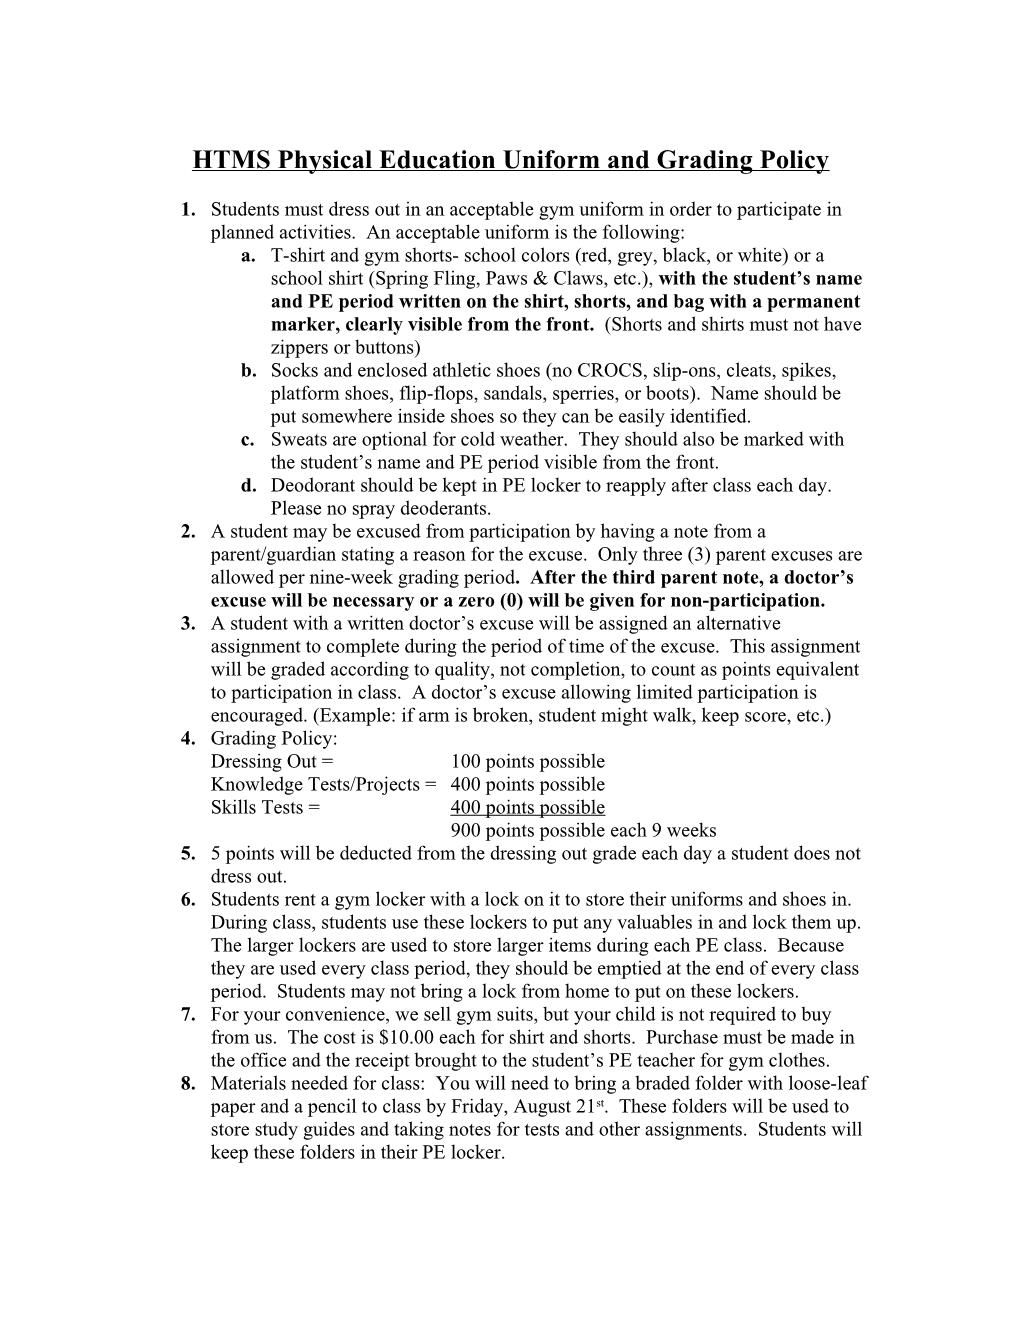 HTMS Physical Education Uniform and Grading Policy